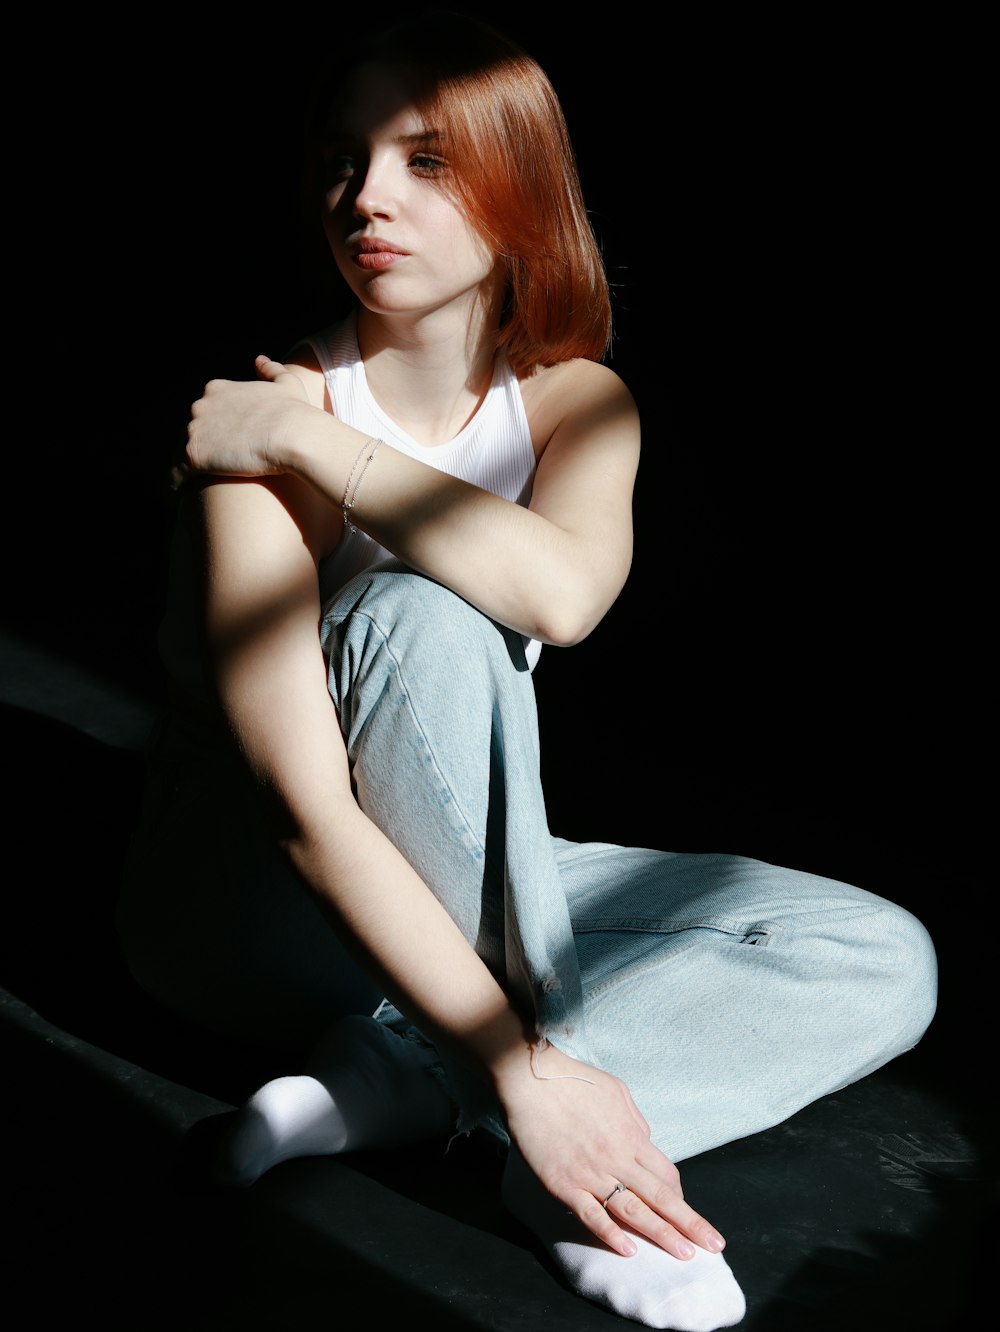 a woman with red hair sitting on the ground